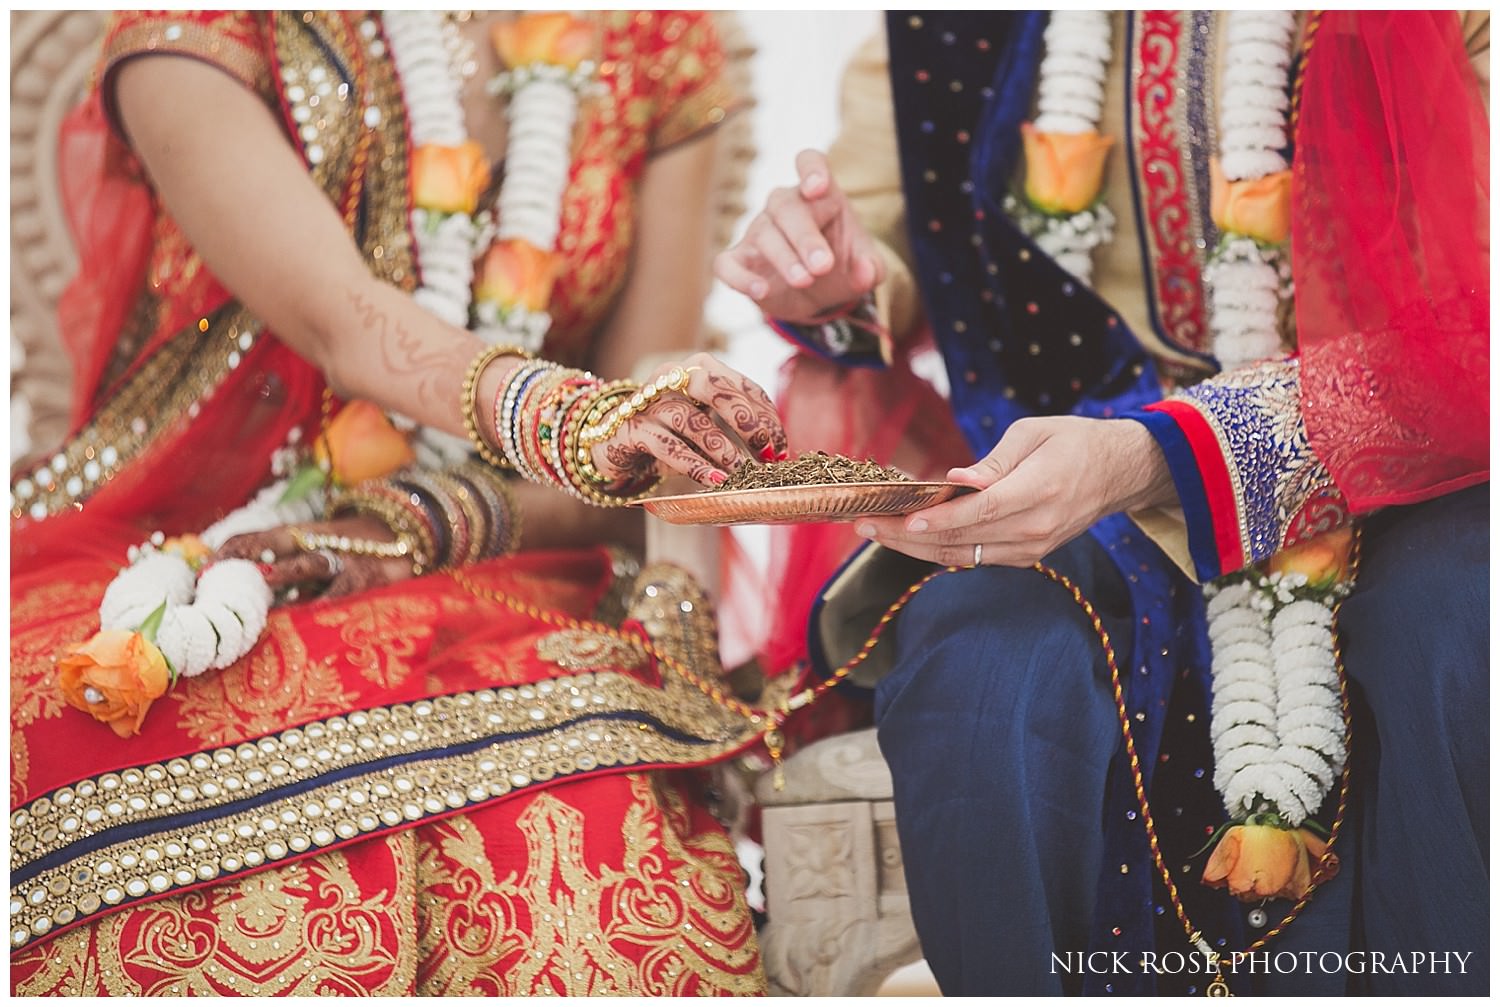  Asian Hindu wedding rituals taking place in the East Wintergarden at London's Canary Wharf 